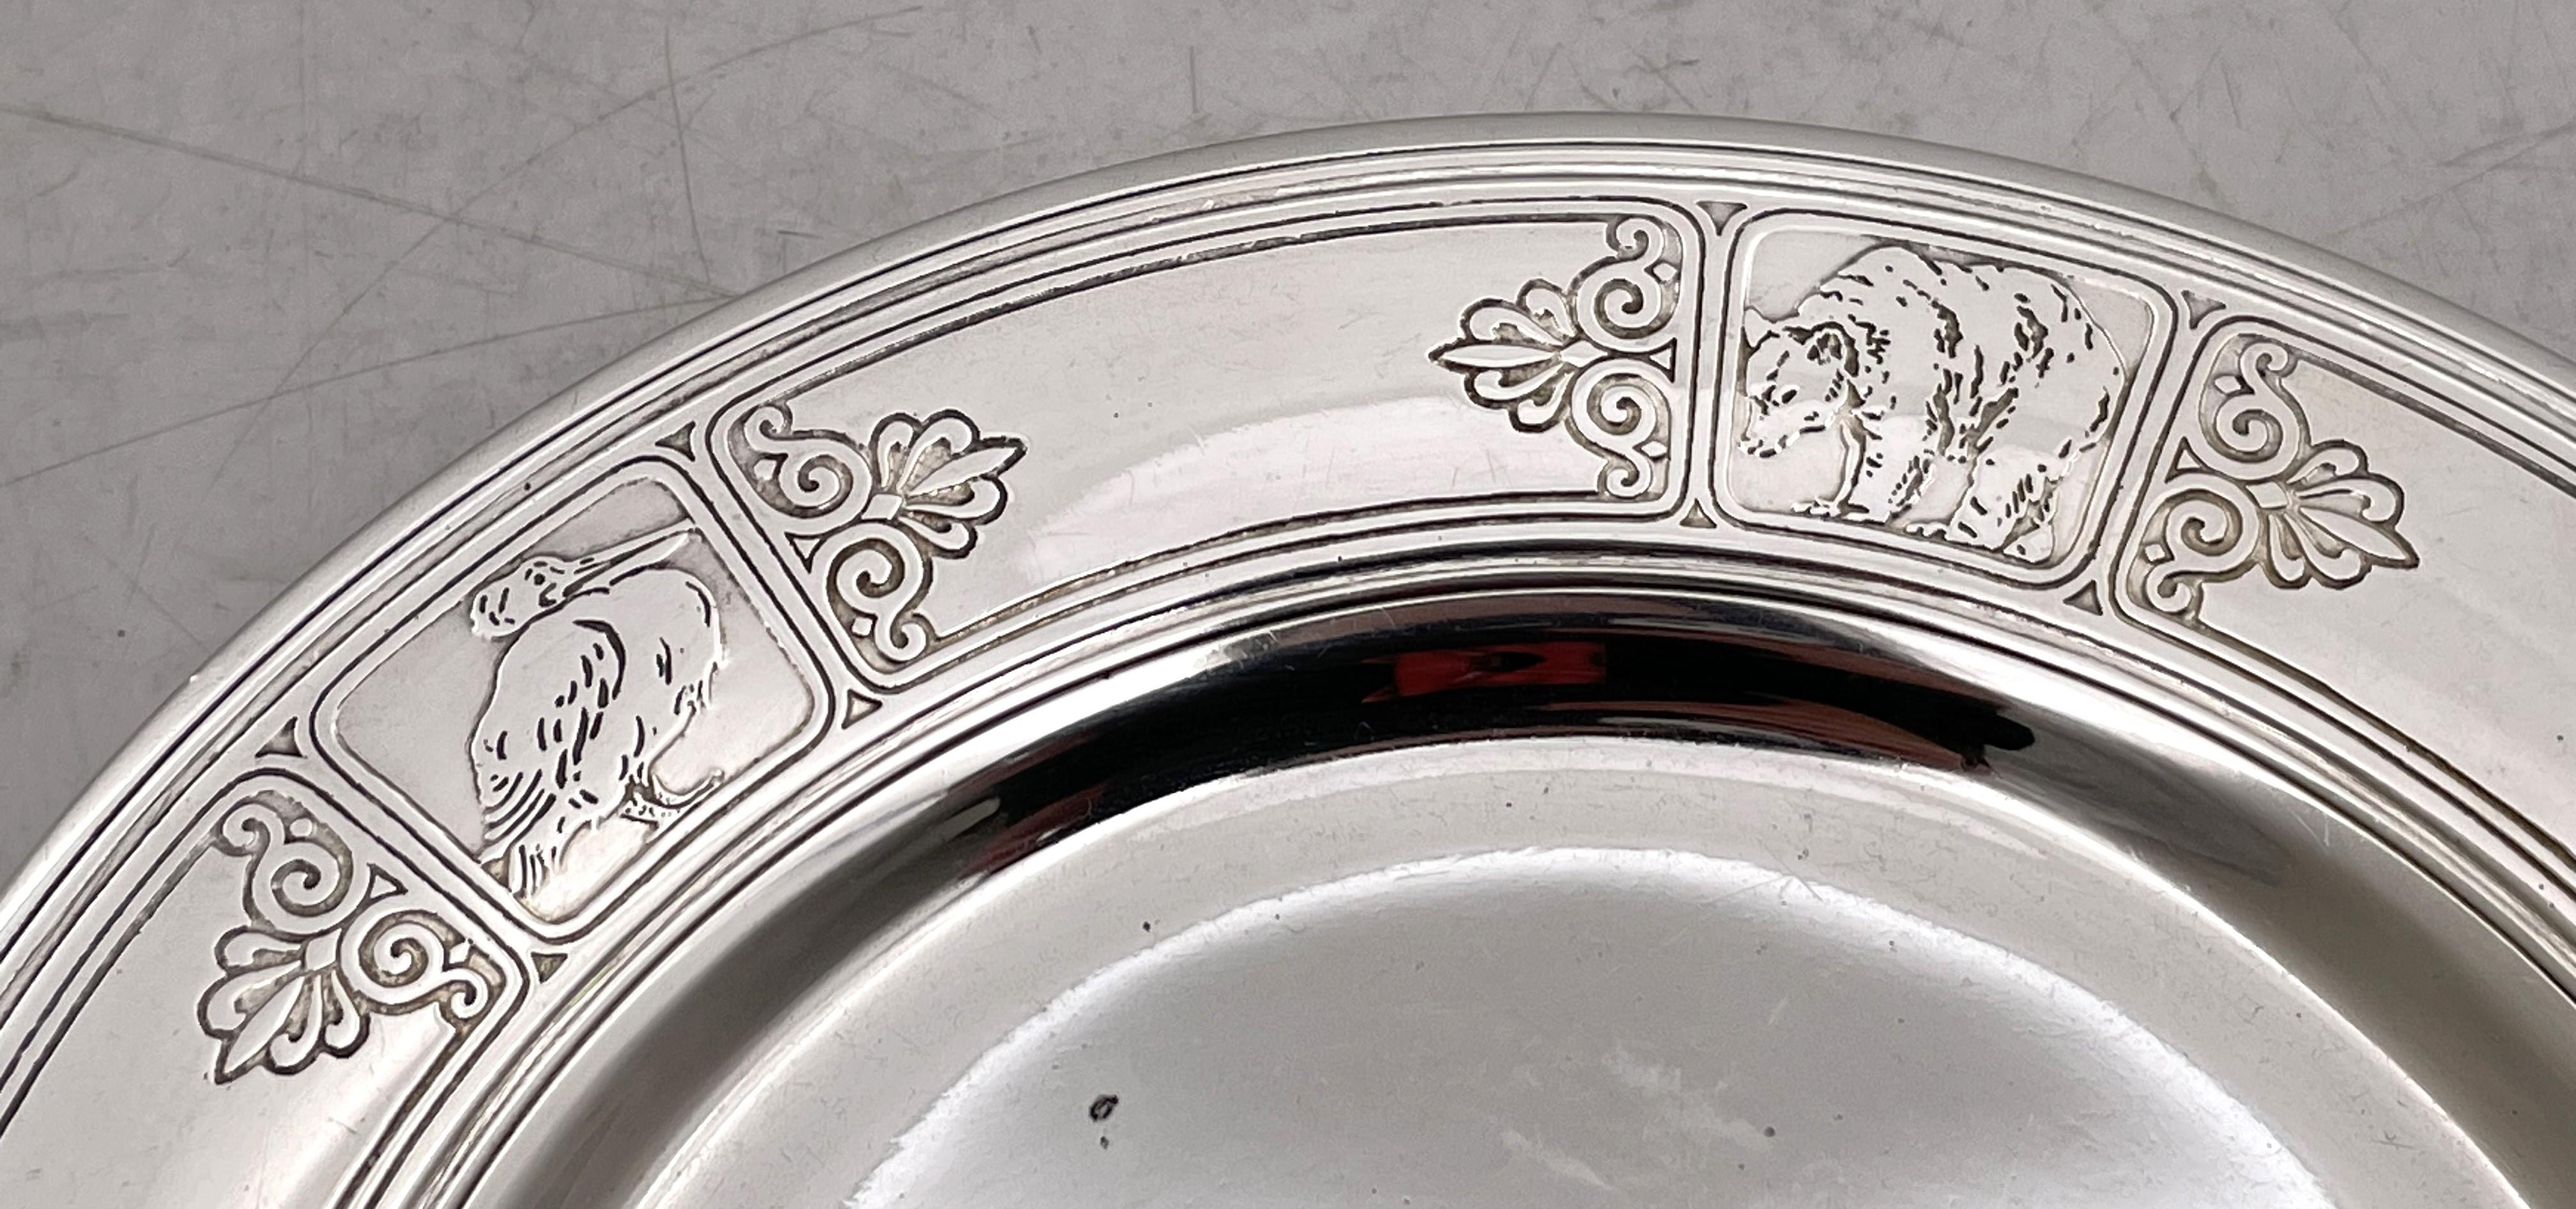 Tiffany & Co. Sterling Silver 1927 Child's Plate / Dish with Animal Motifs In Good Condition For Sale In New York, NY